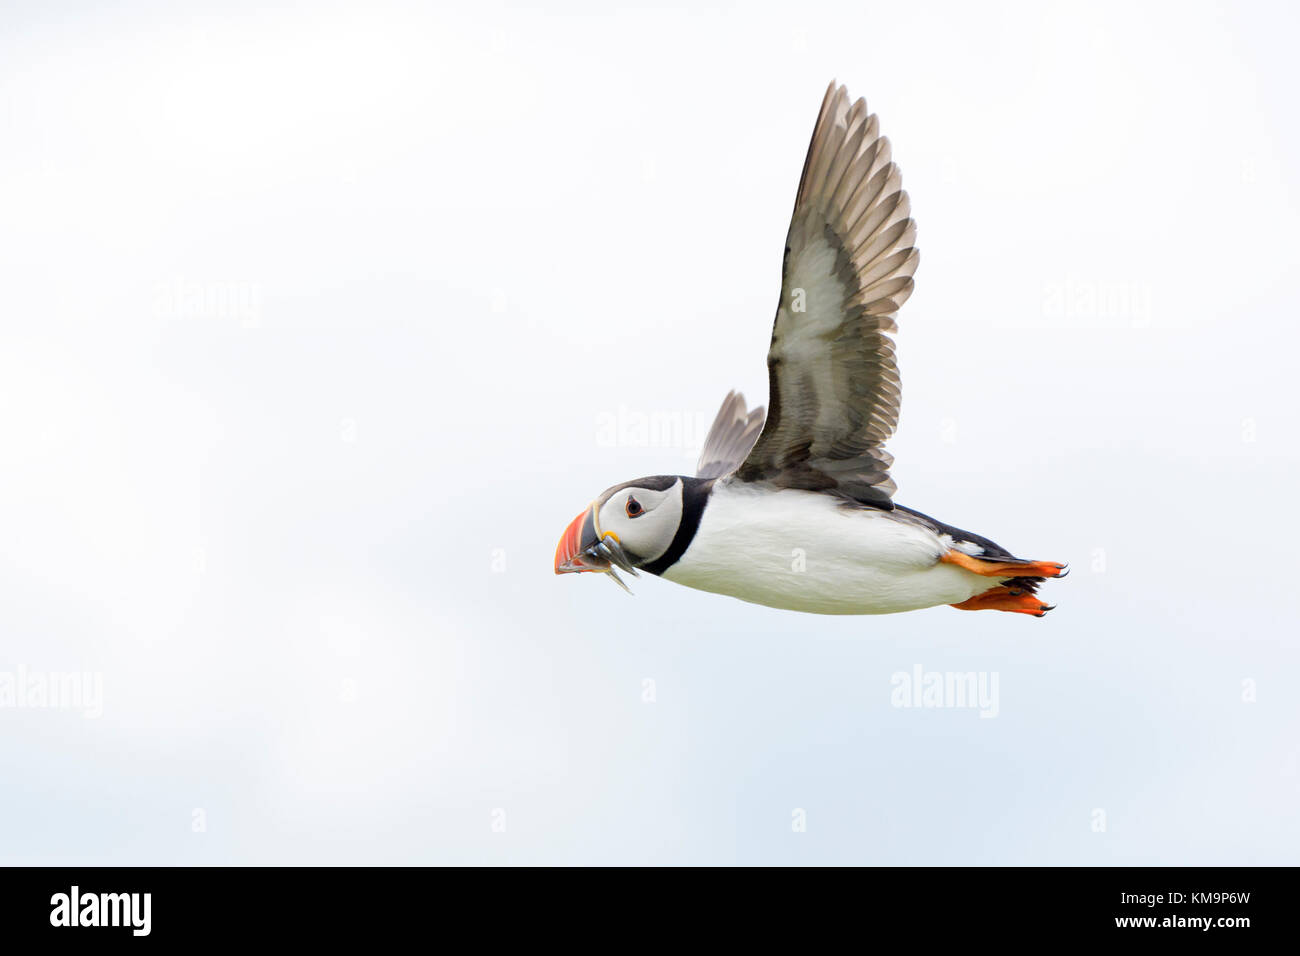 Atlantic puffin (Fratercula arctica) flying with caught fish, Farne Islands, Northumberland, England, UK. Stock Photo